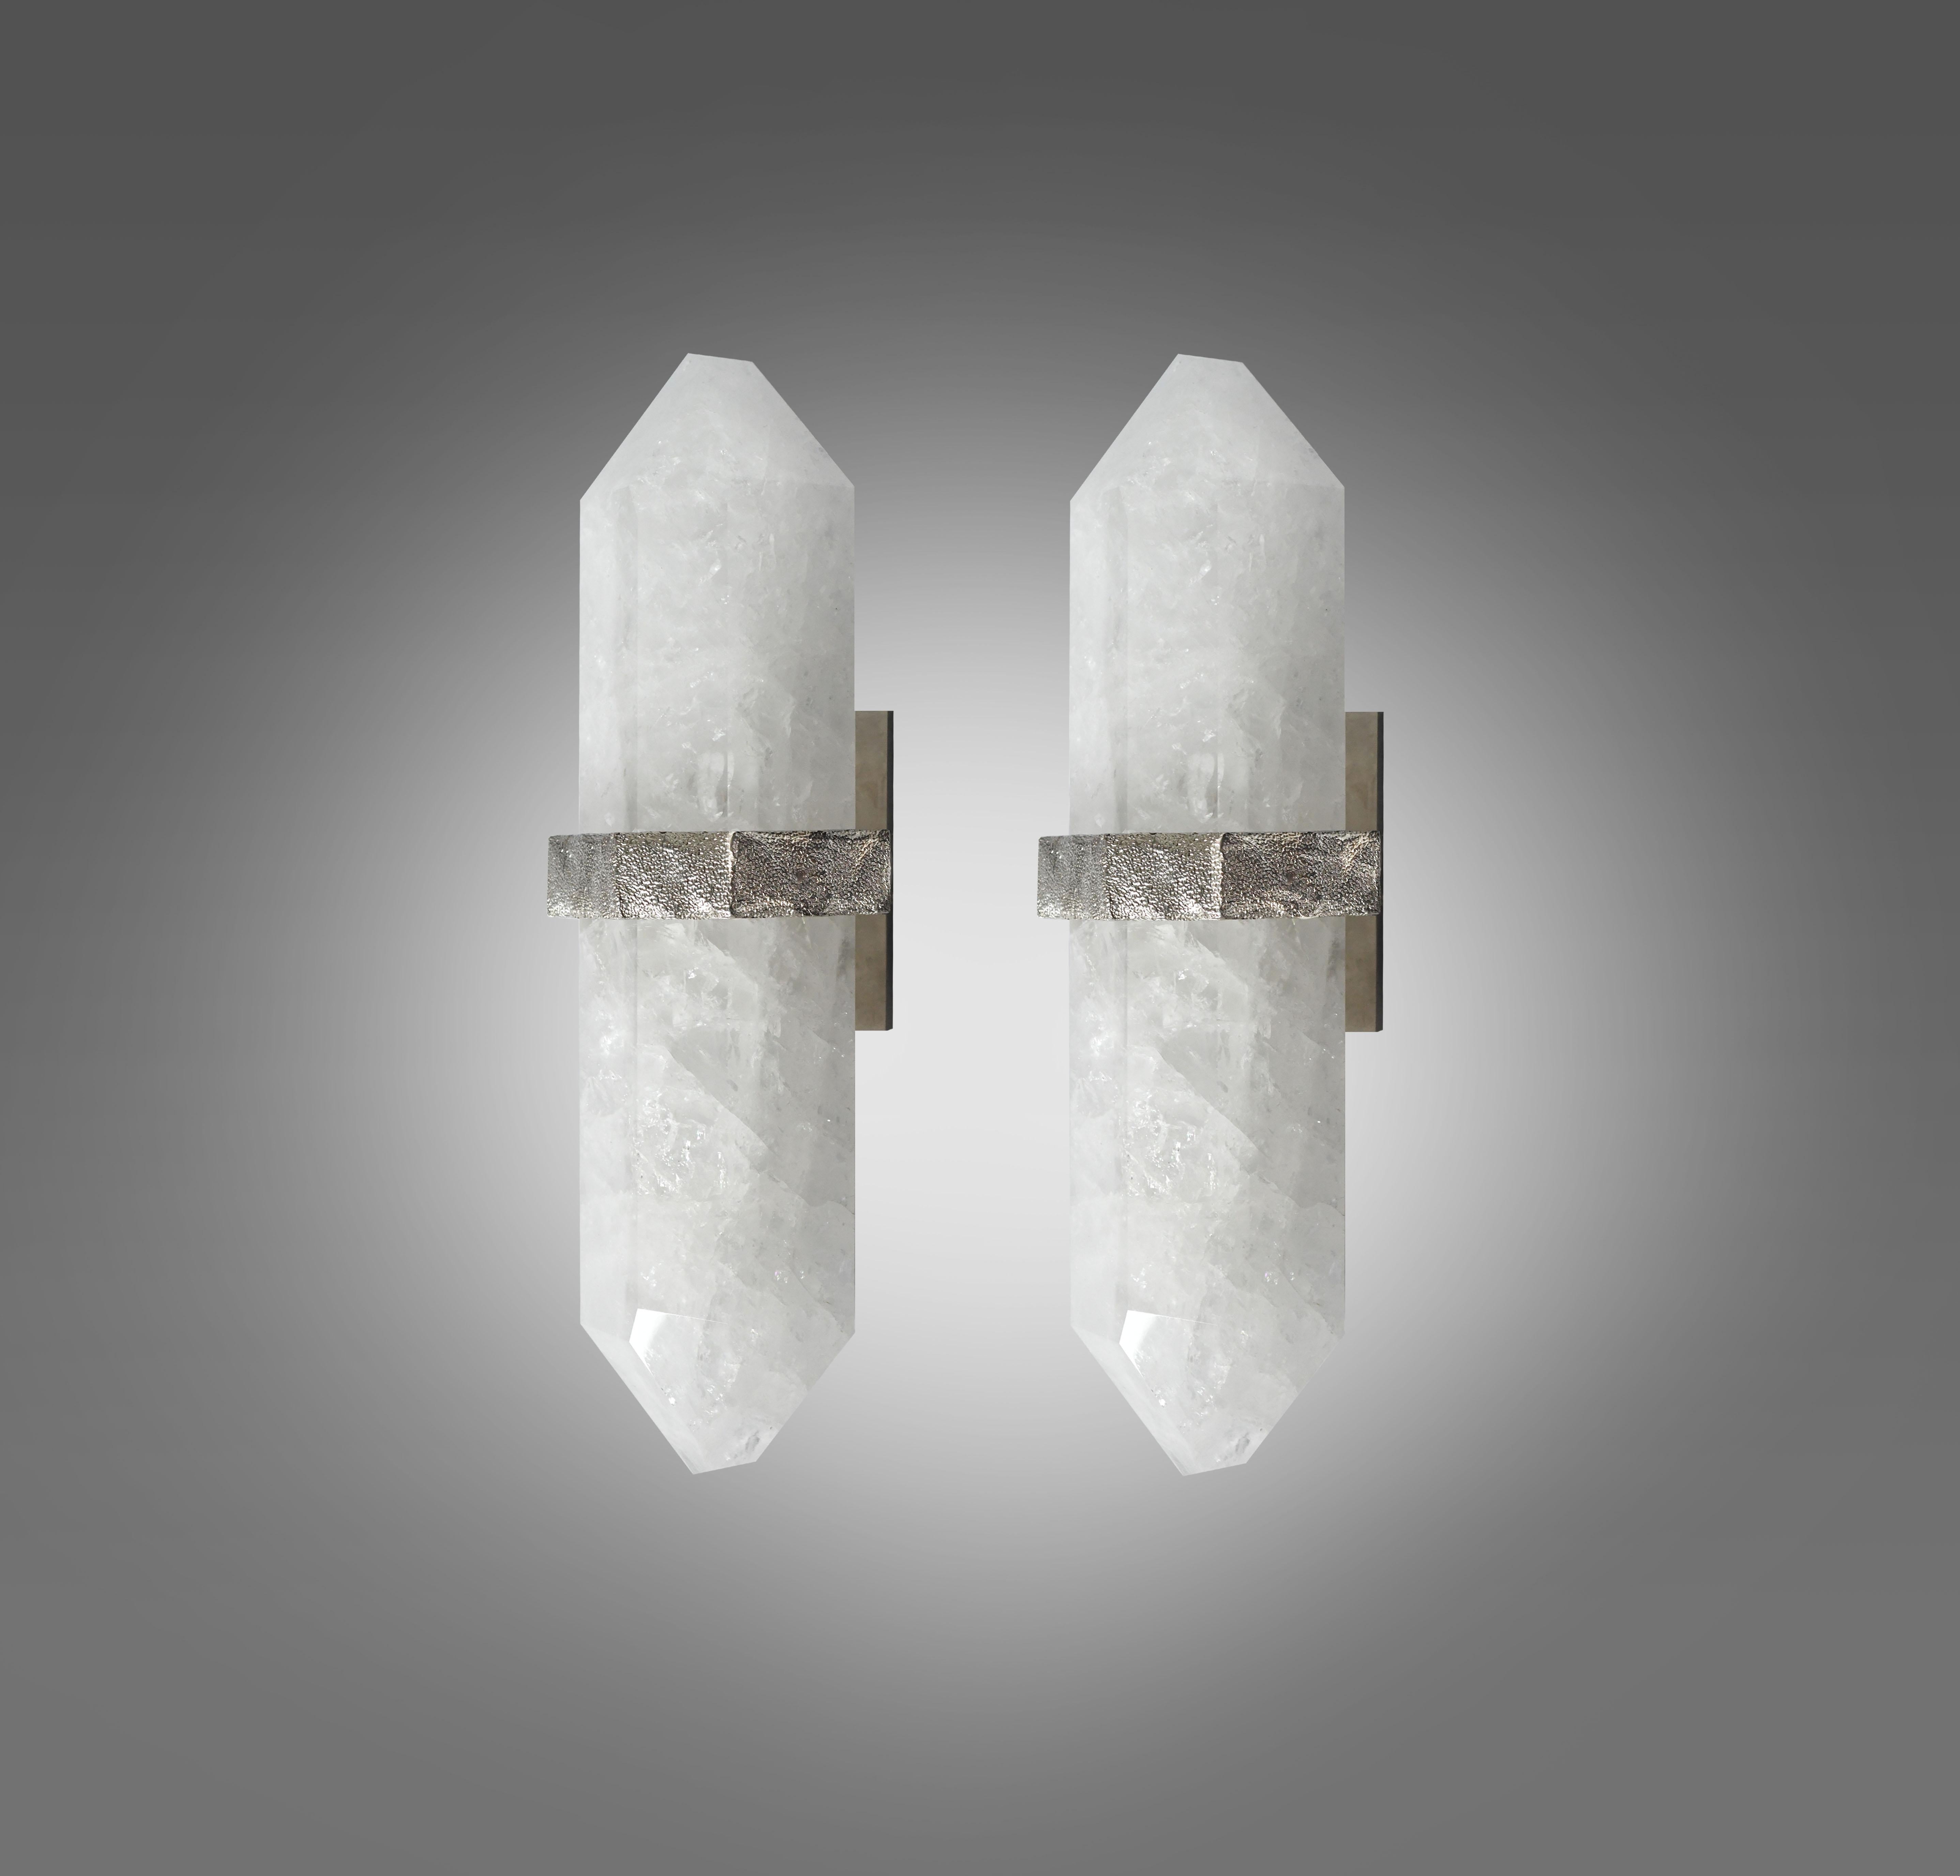 Group of Four fine carved diamond form rock crystal quartz wall sconces, mount with rich texture of cast nickel plating decoration, created by Phoenix Gallery NYC. 
Custom size, finish, and quantity upon request. 
Each sconce installed two